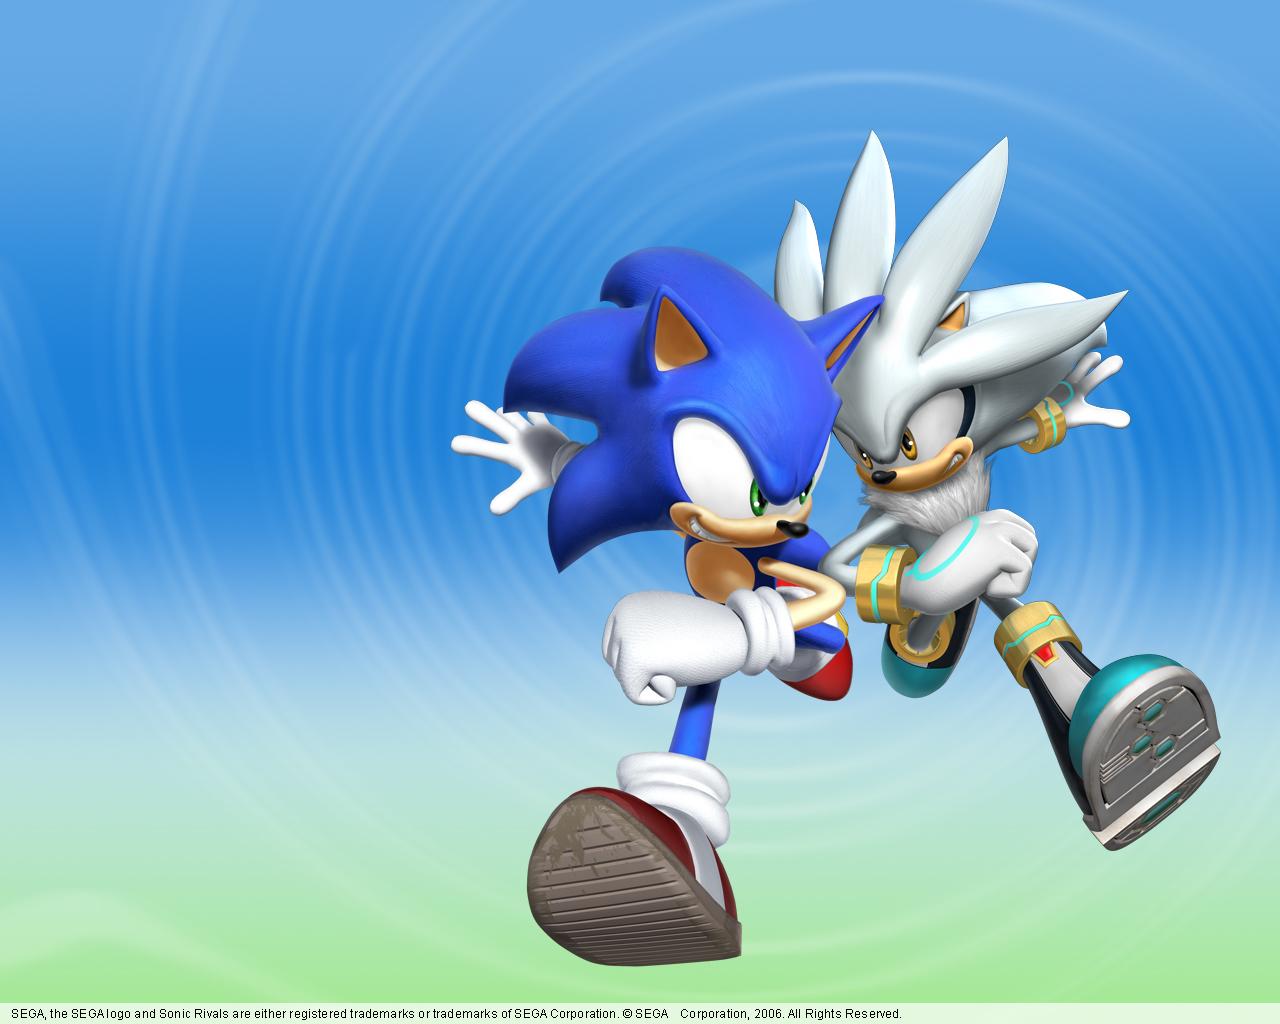 Sonic Rivals Wallpaper. Need for Speed Rivals Wallpaper, Rivals Wallpaper and Sonic Rivals Wallpaper